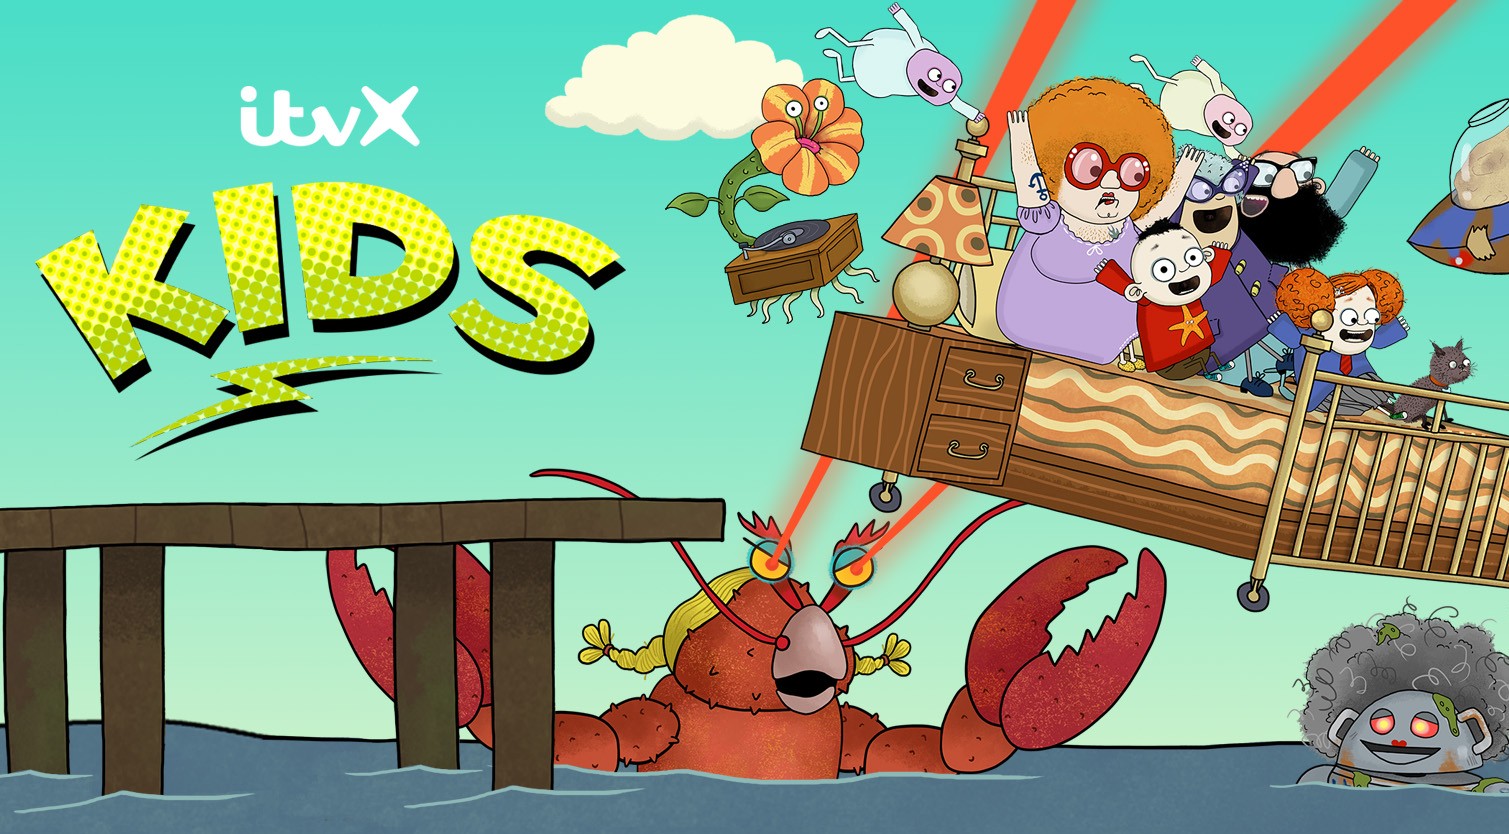 Dave Spud Series 3 Launches on CITV